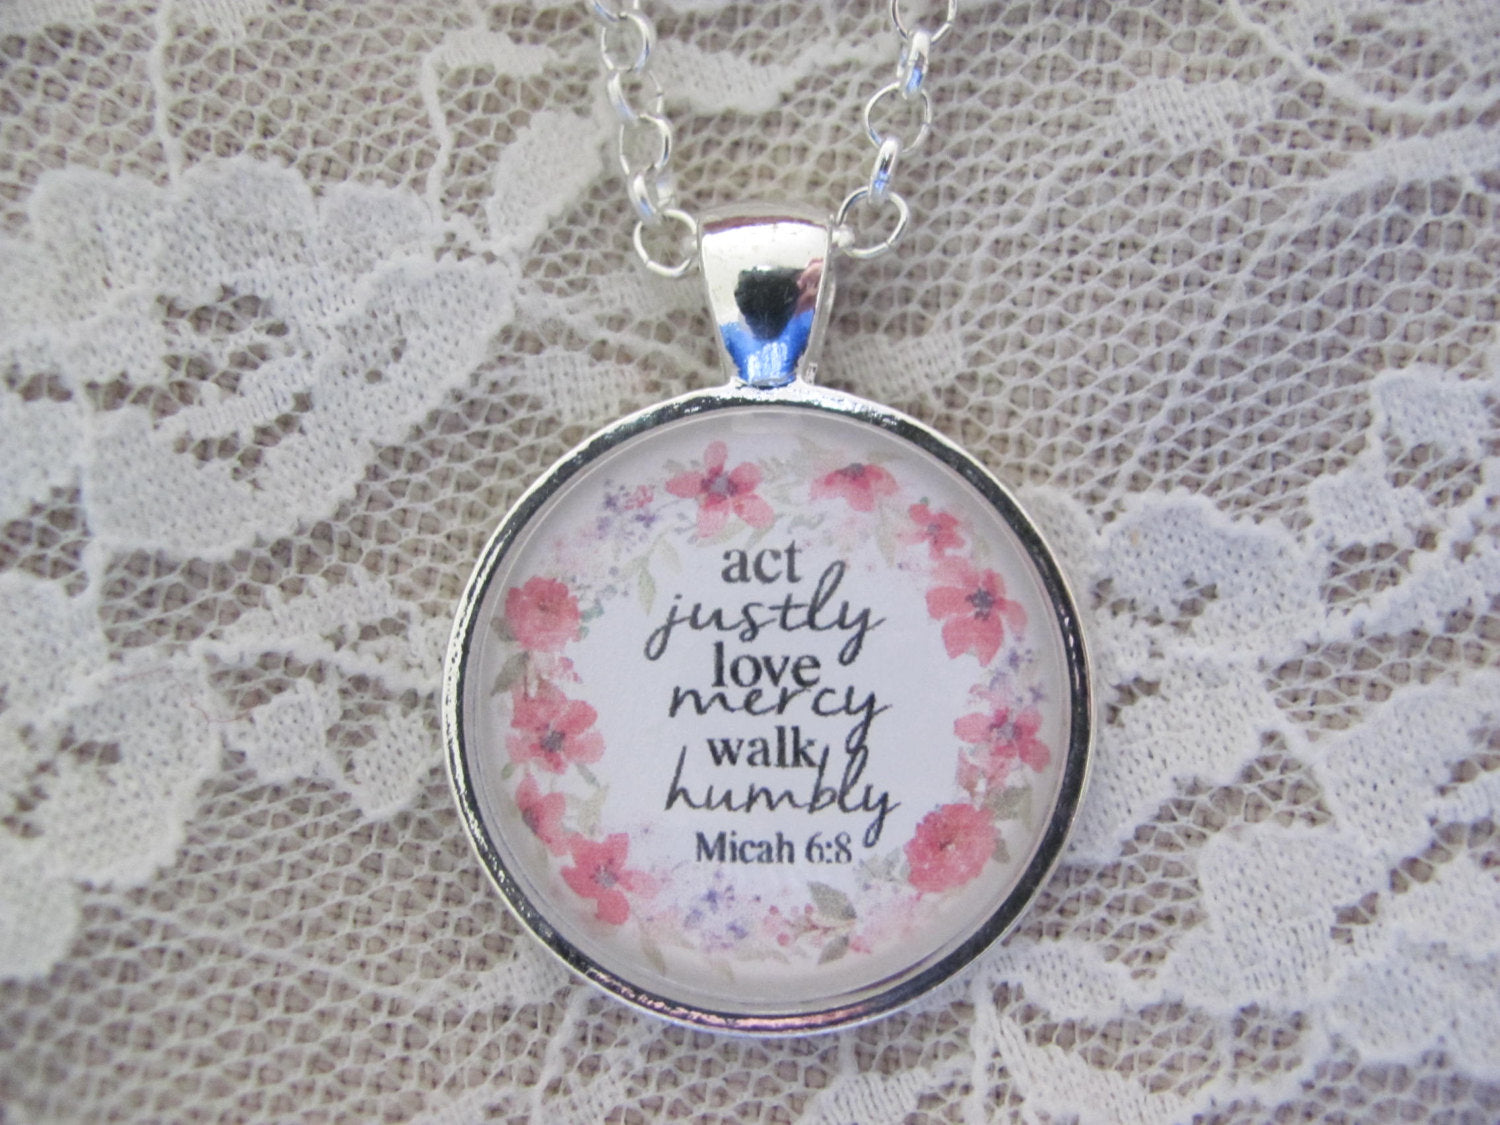 Micah 6:8 Pendant Necklace - Redeemed Jewelry